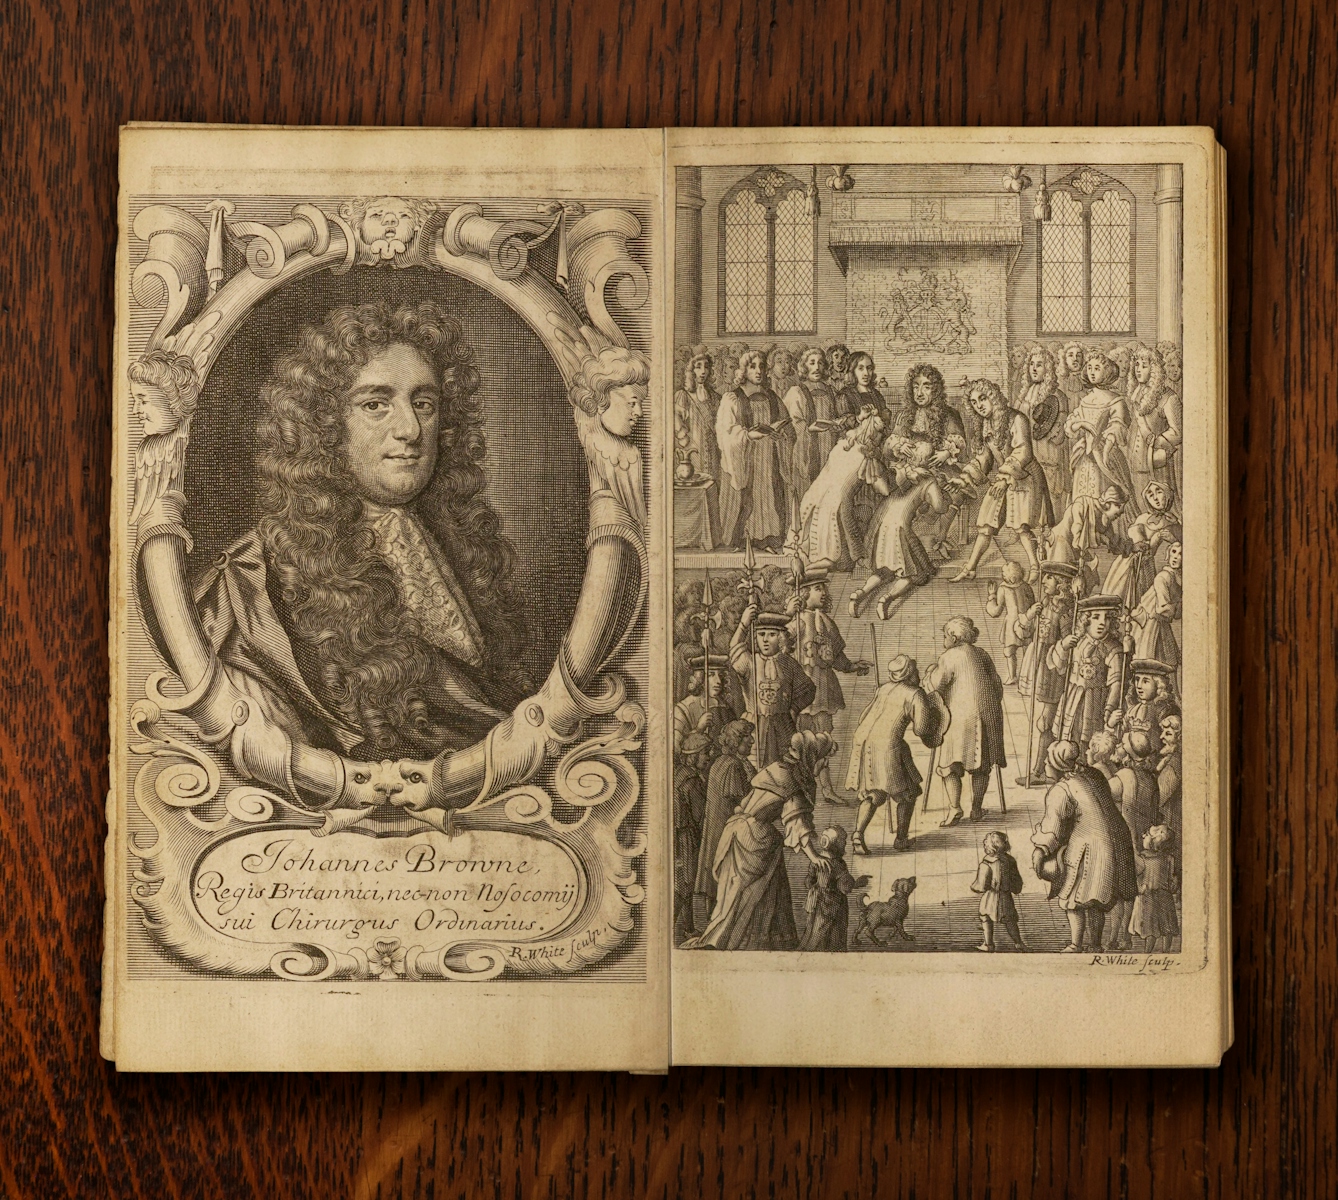 A photograph of an open book against a dark wood background. The pages of the book show two illustrations. To the left is a portrait of Johannes Brown shown with long curly hair and a lace neckerchief. To the right there is a depiction of a crowded official ceremony with the King presented with diseased men who are kneeling in front of him.